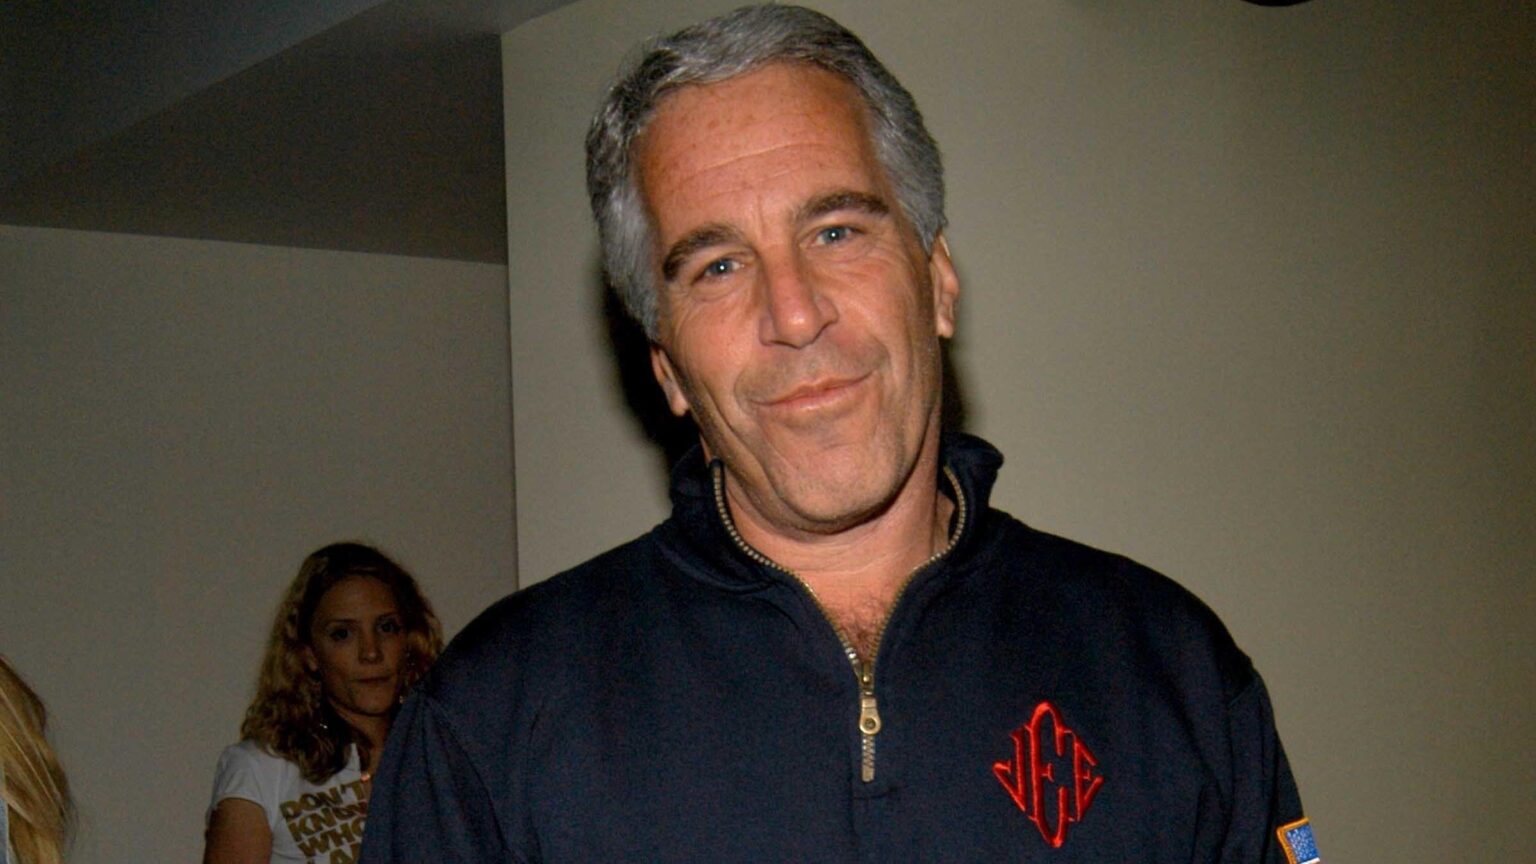 Royalty, politicians, celebrities – the black book left in the wake of Jeffrey Epstein condemns big names. What will the book mean for Ghislaine Maxwell?